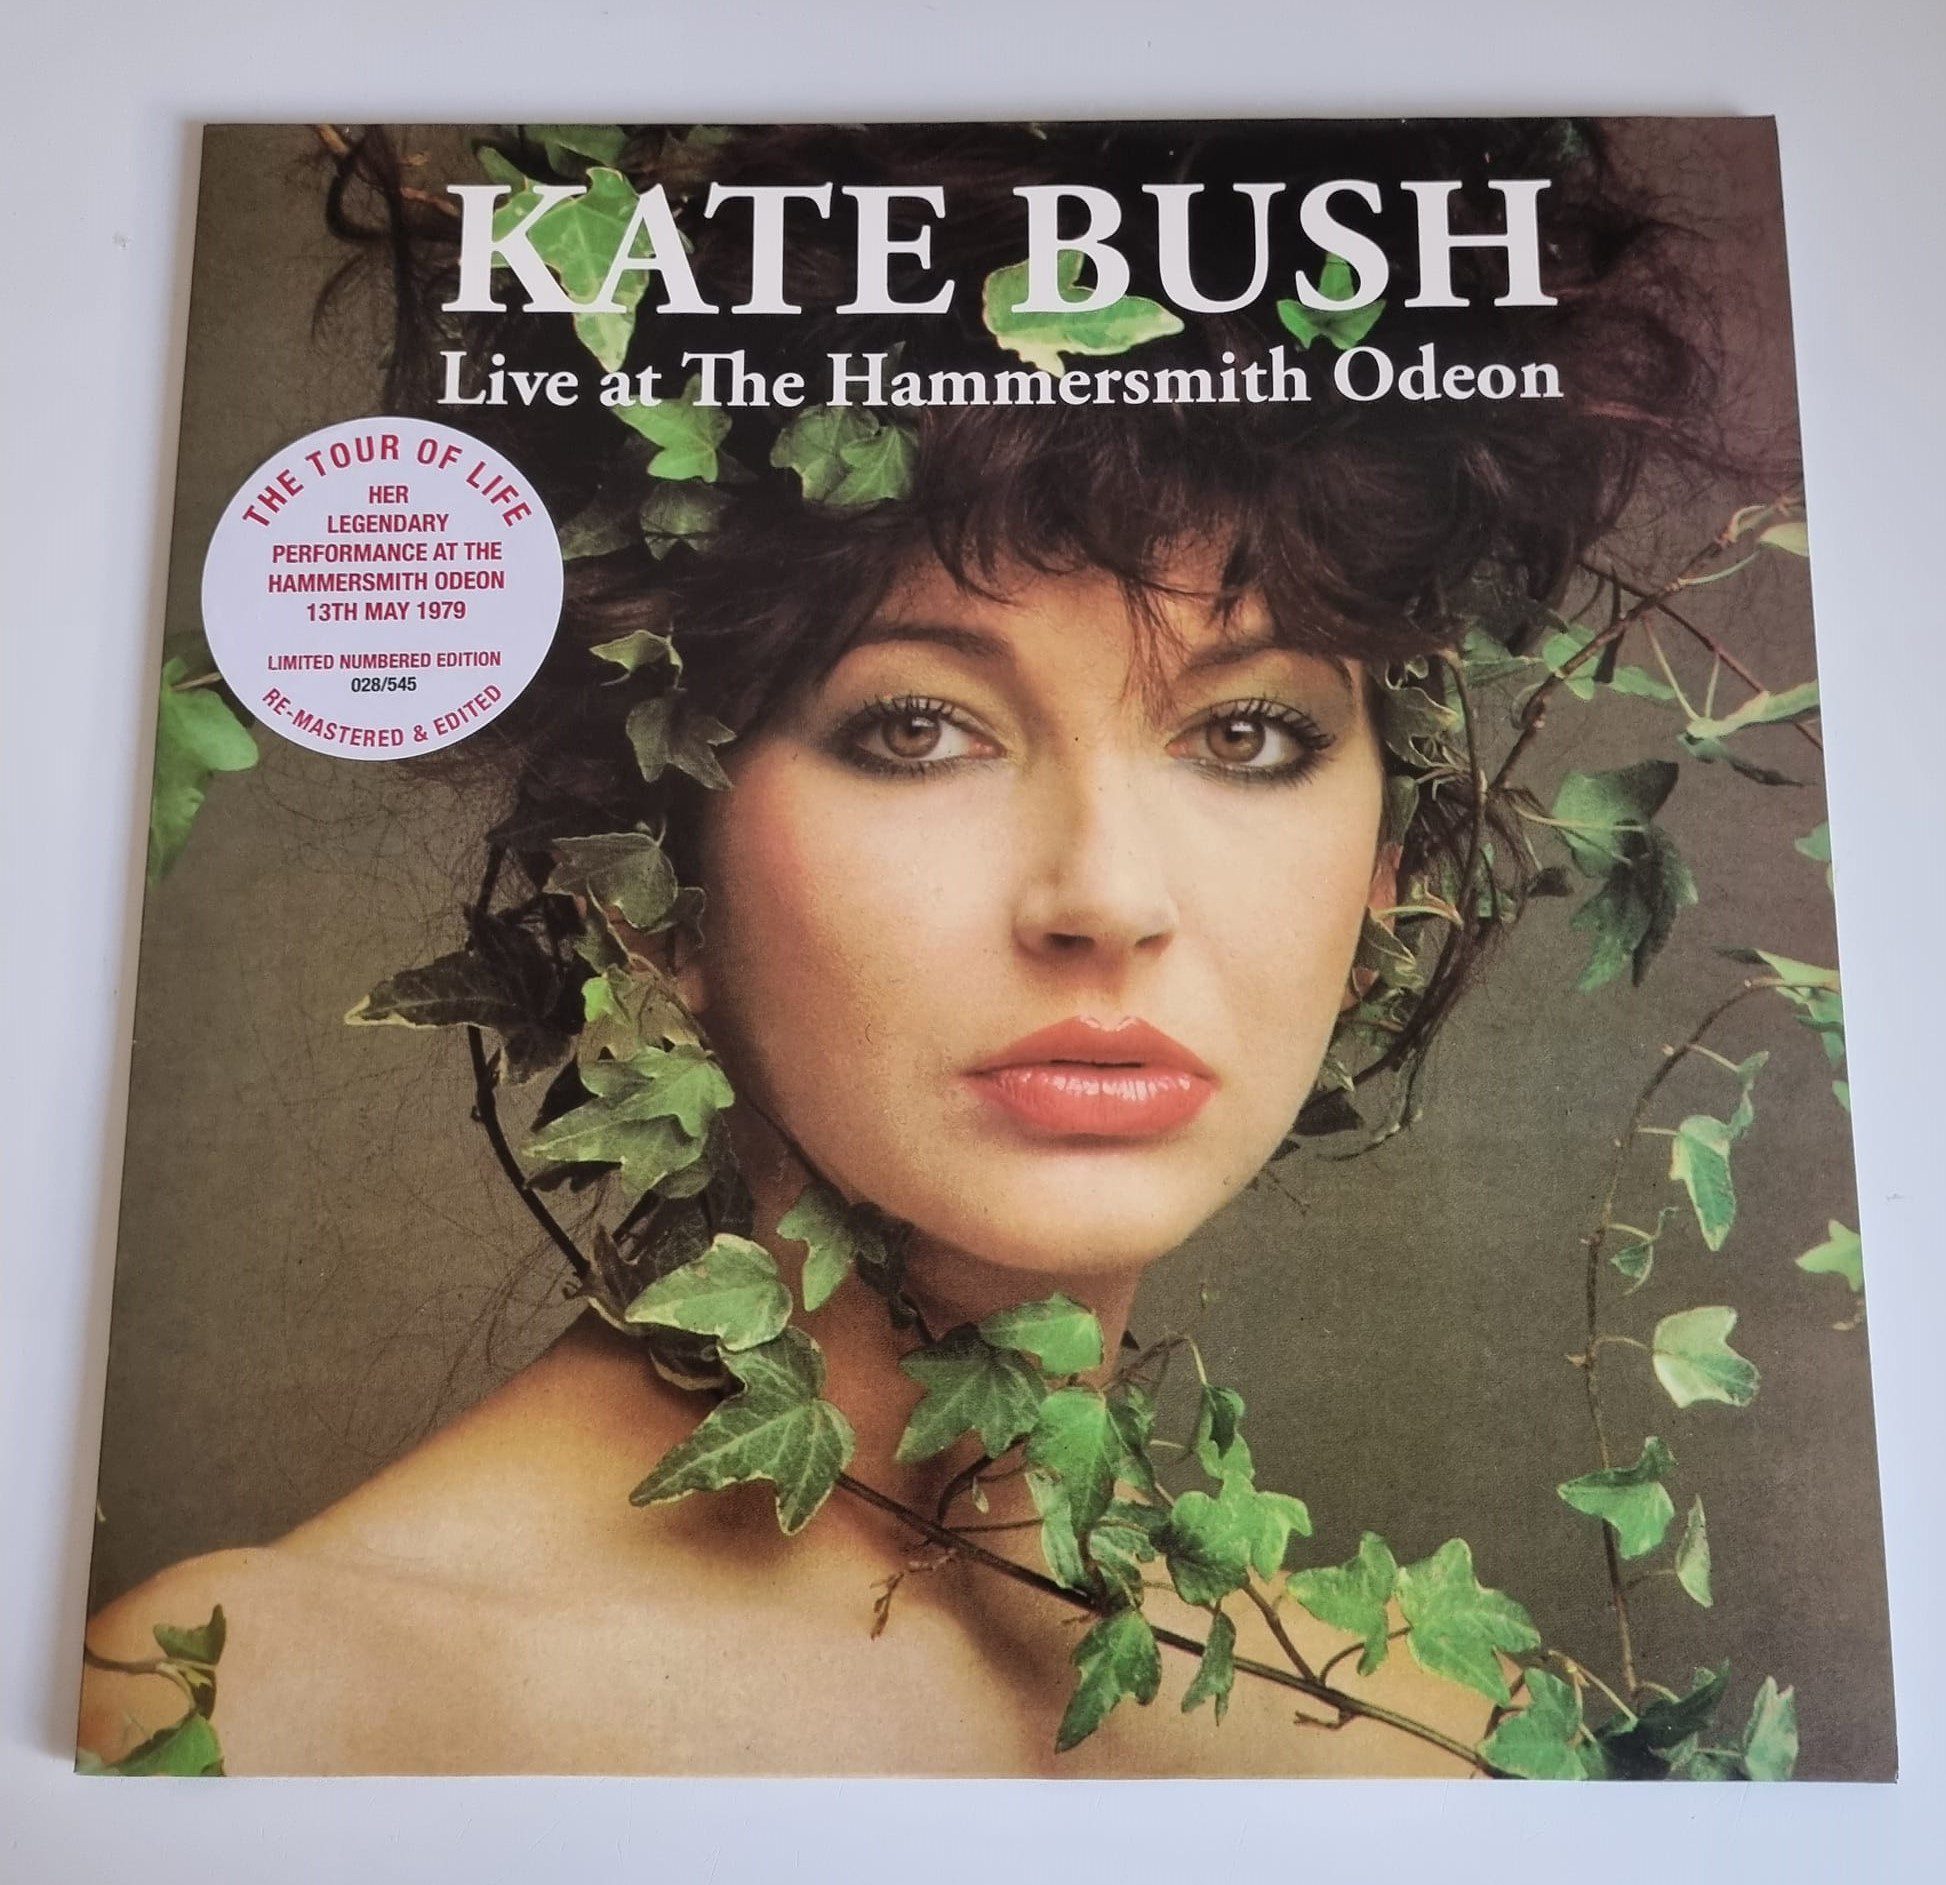 Buy this rare Kate Bush record by clicking here